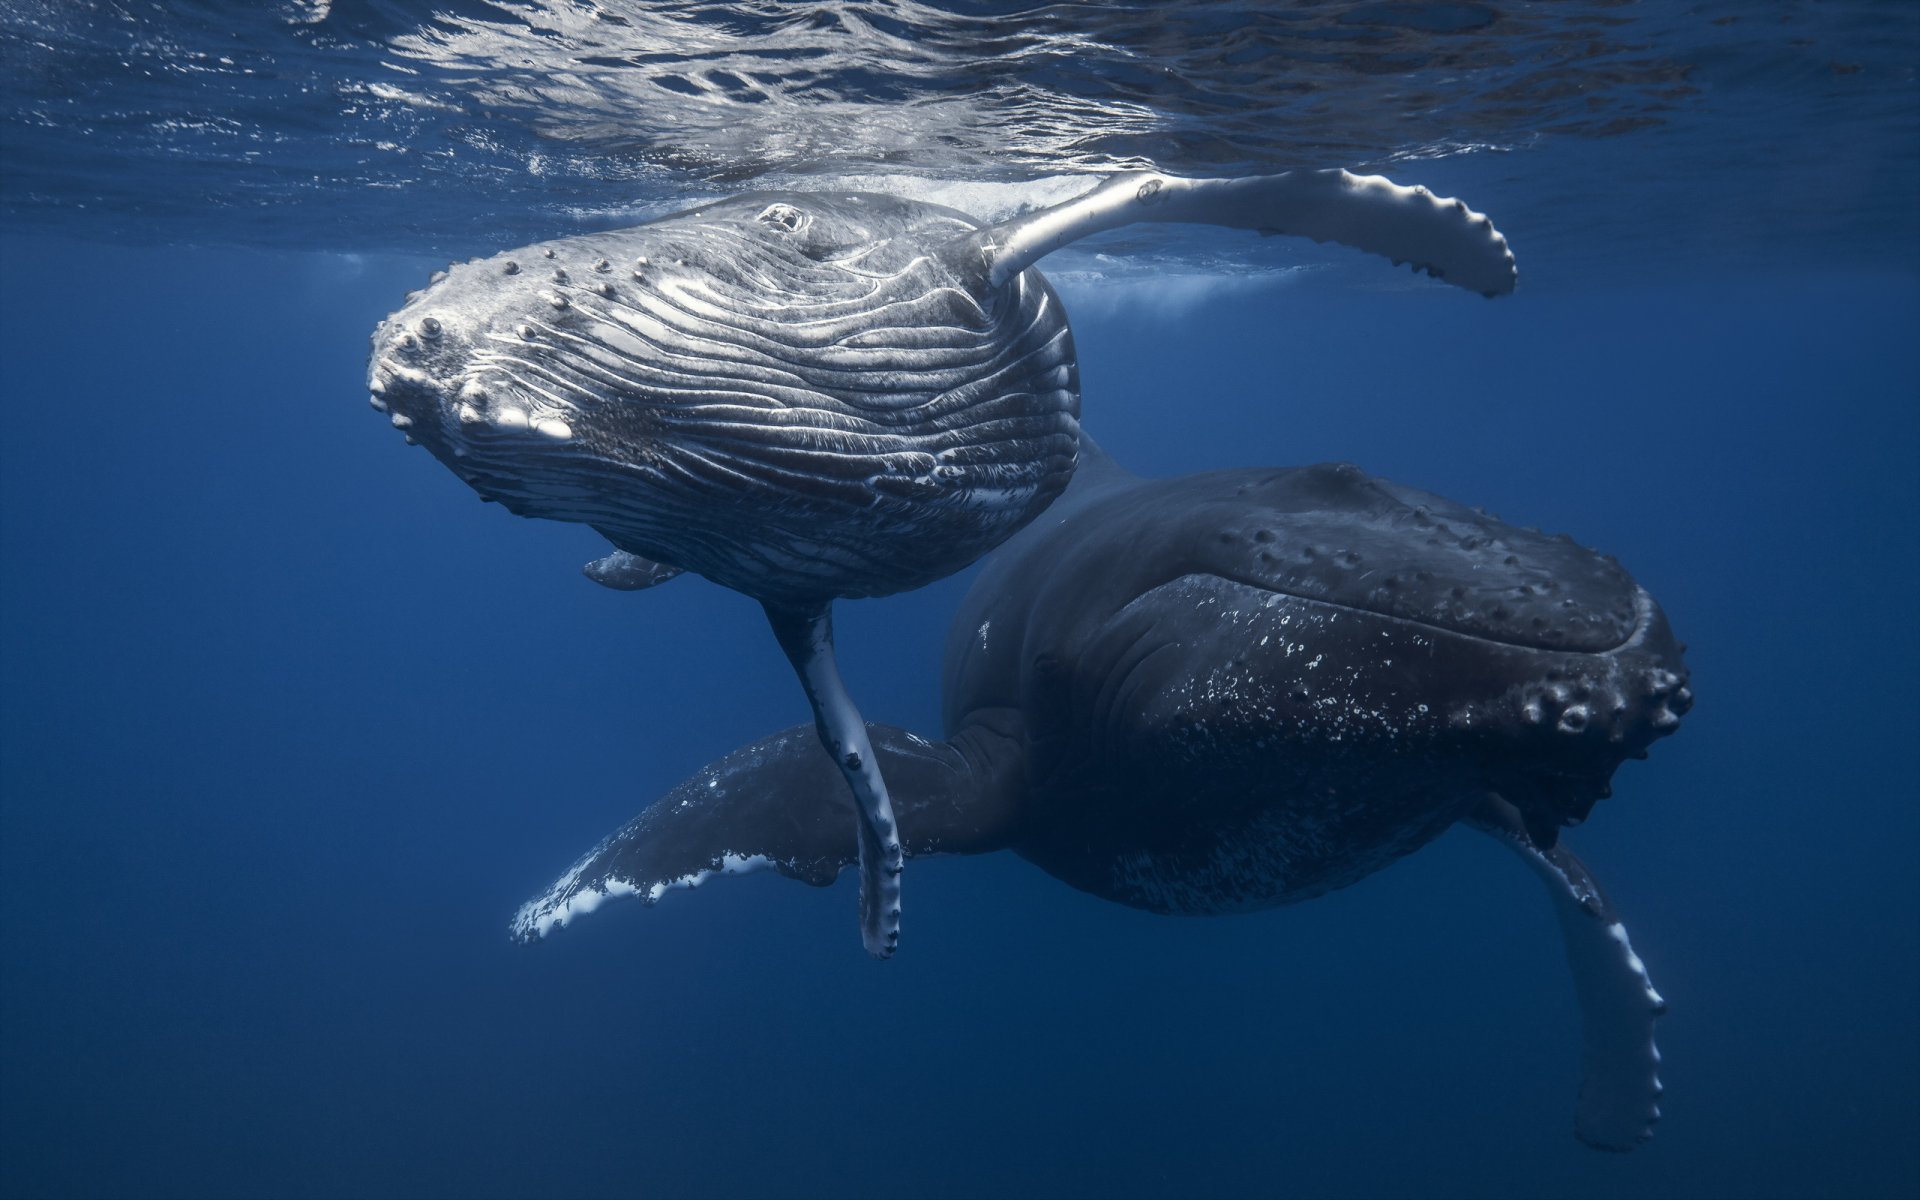 Whales are rather introverted